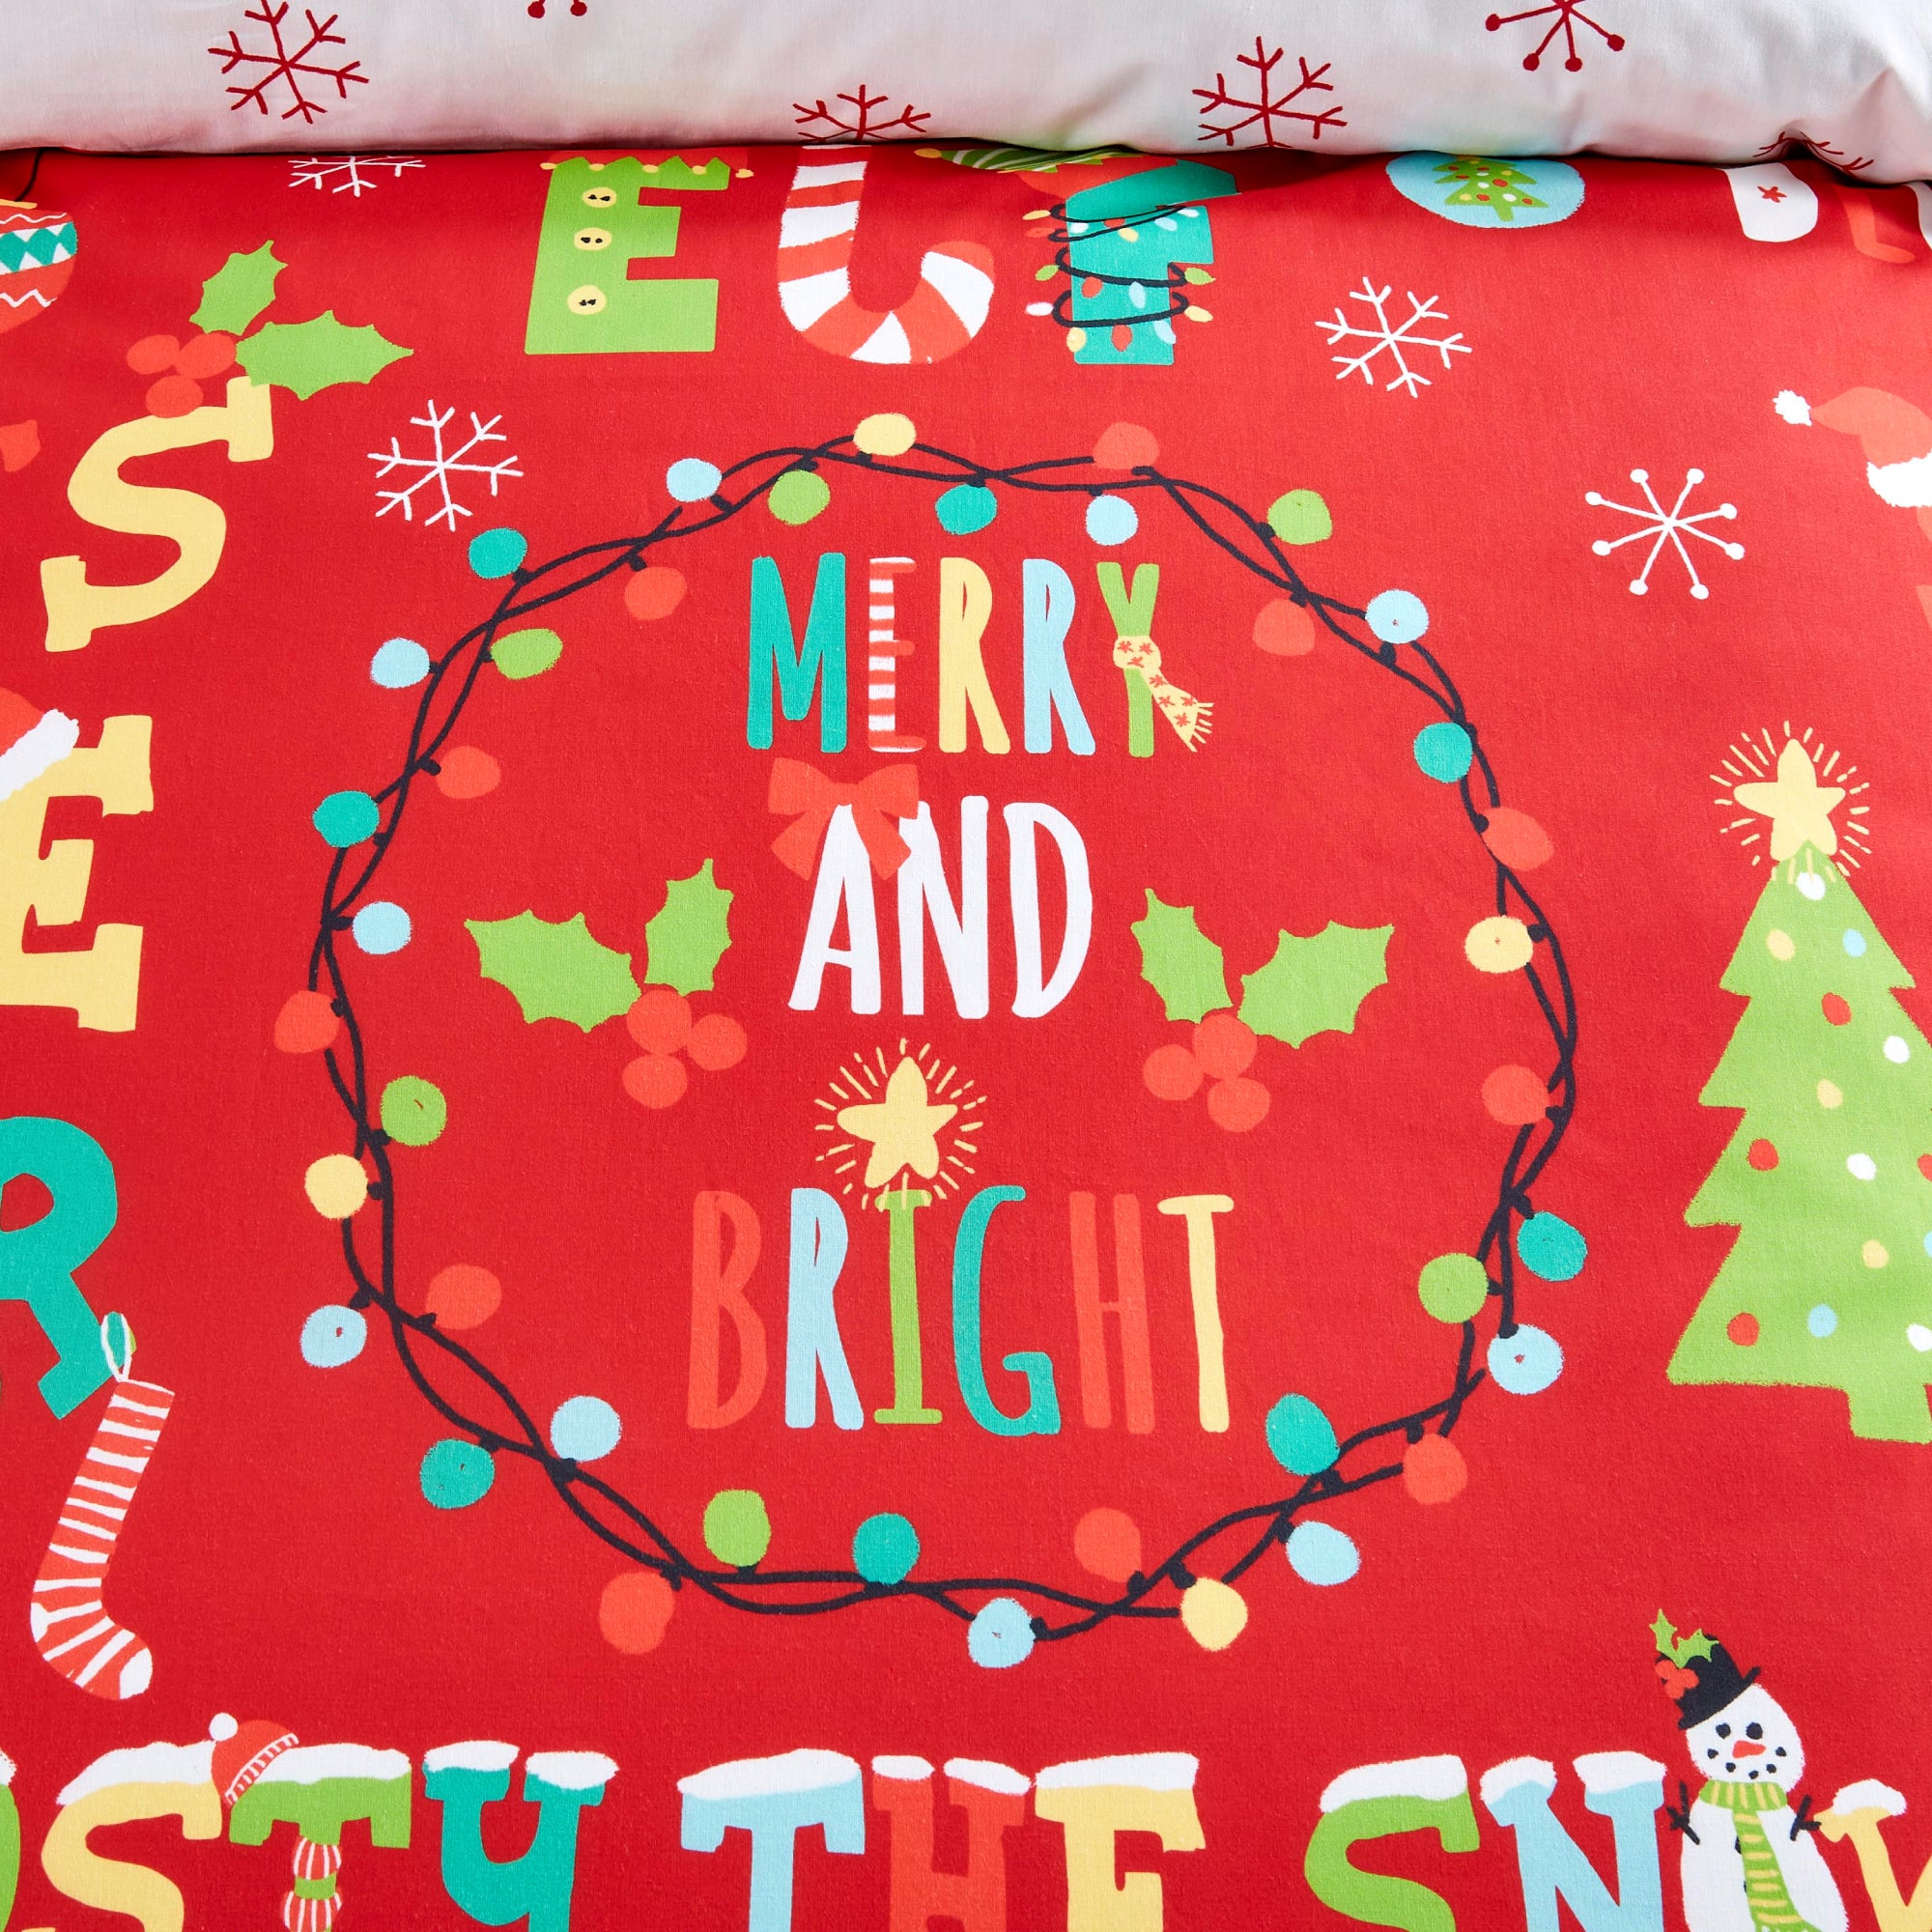 Duvet Cover Set Santa's Little Helper by Fusion Christmas in Red